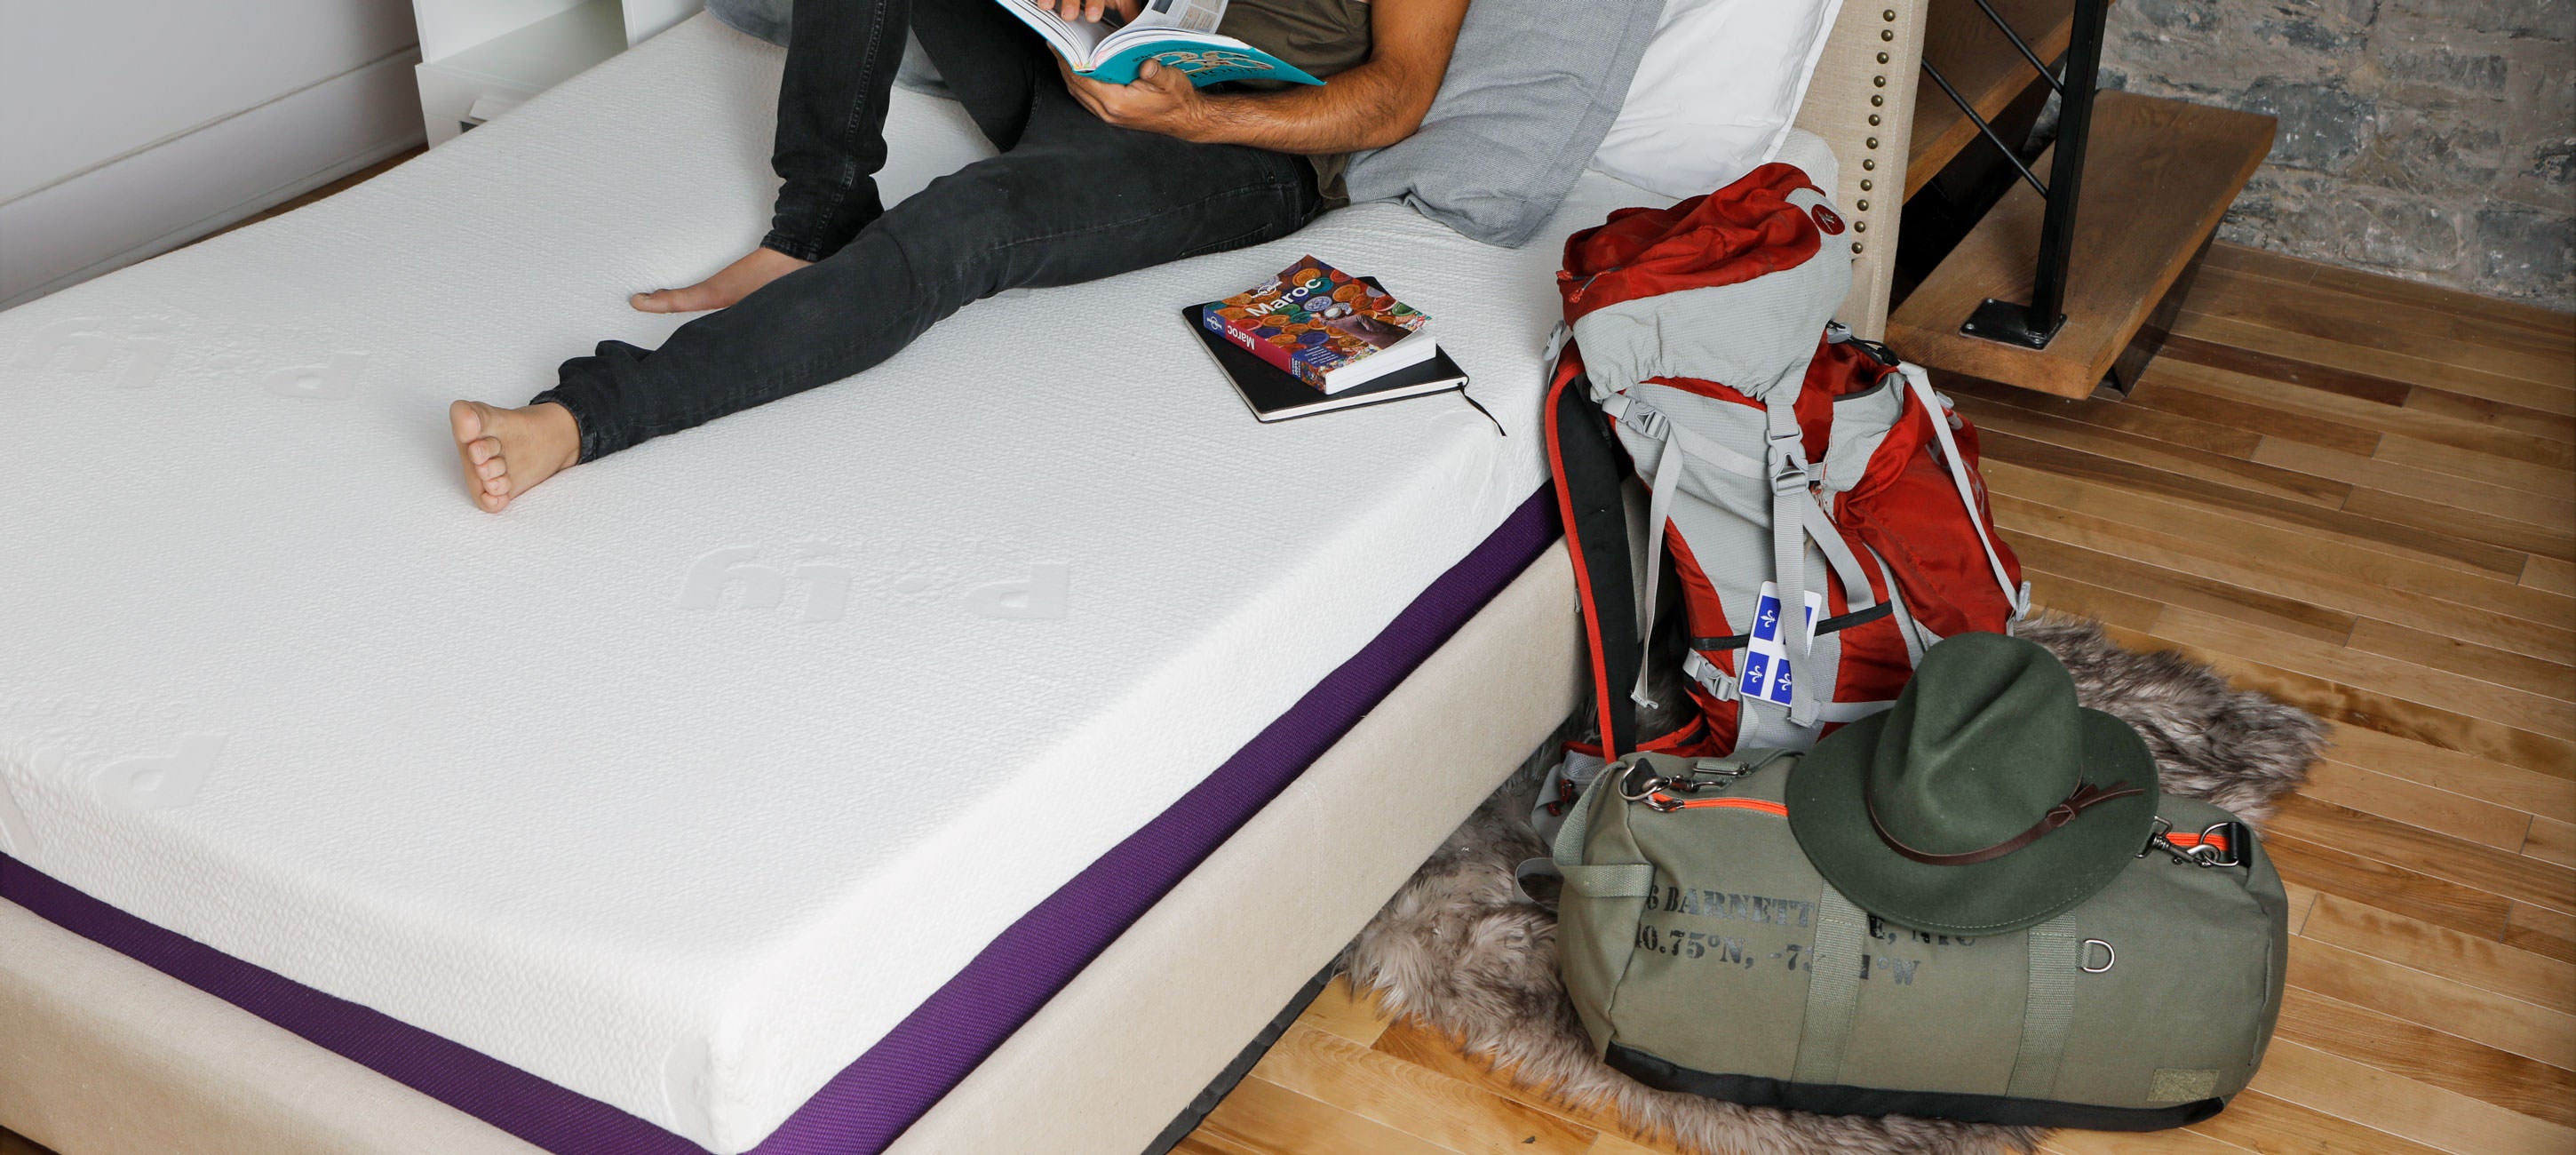 A Man is reading a book while sitting on his Polysleep mattress made in Quebec